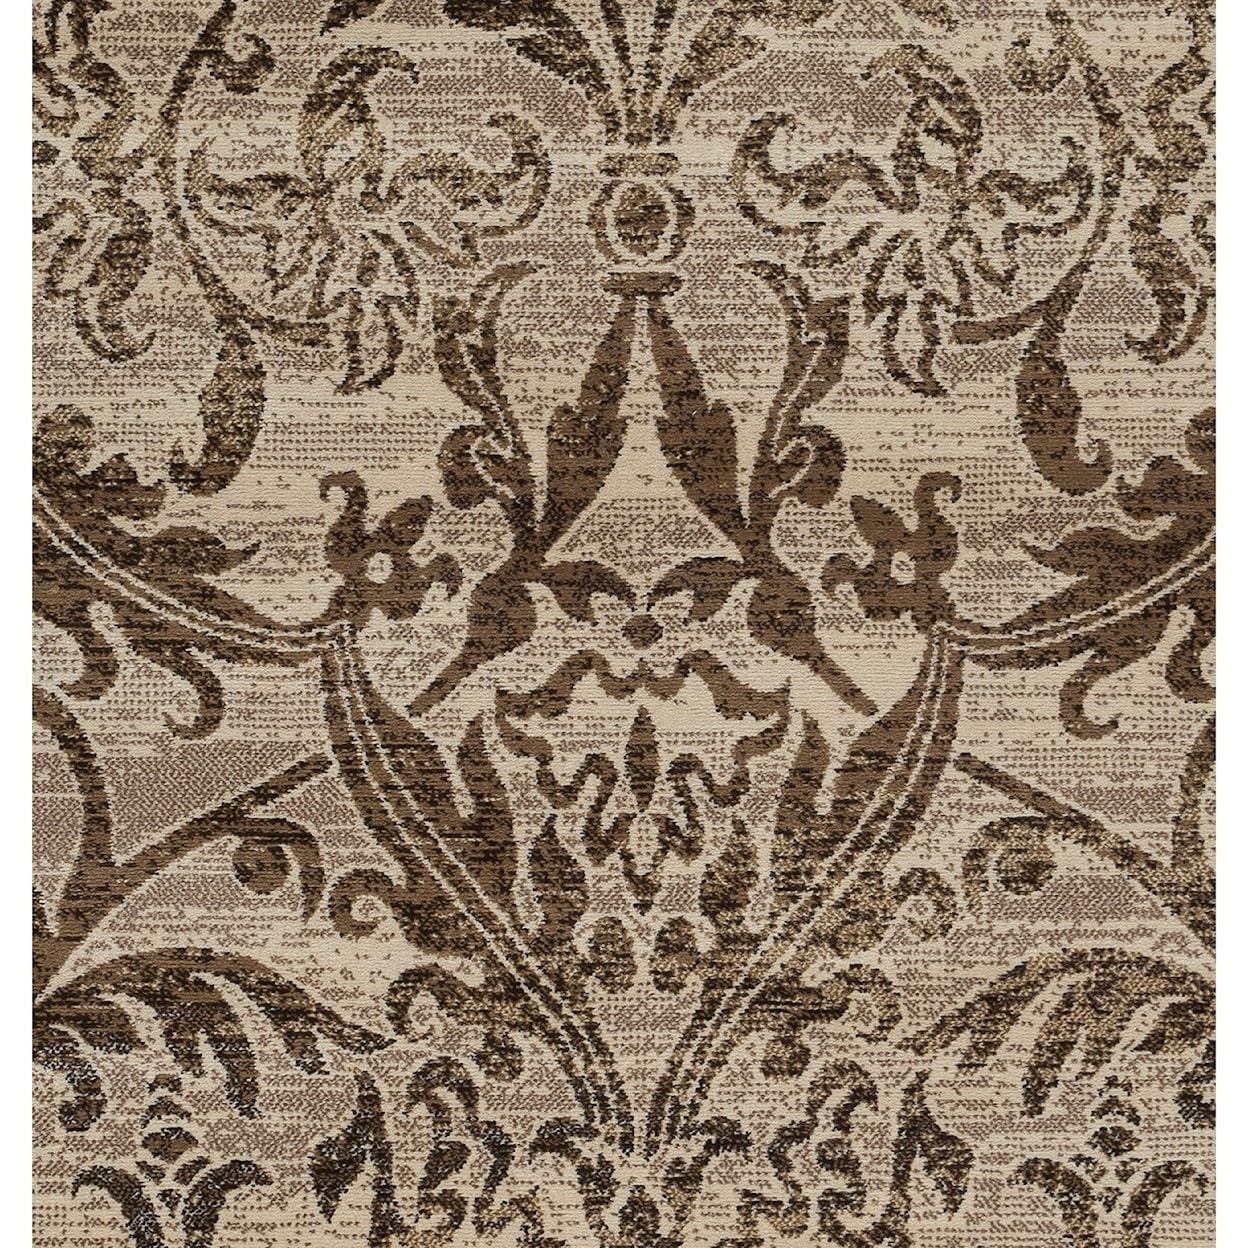 Rizzy Home Chateau 5'3" x 7'7" Rectangle Rug